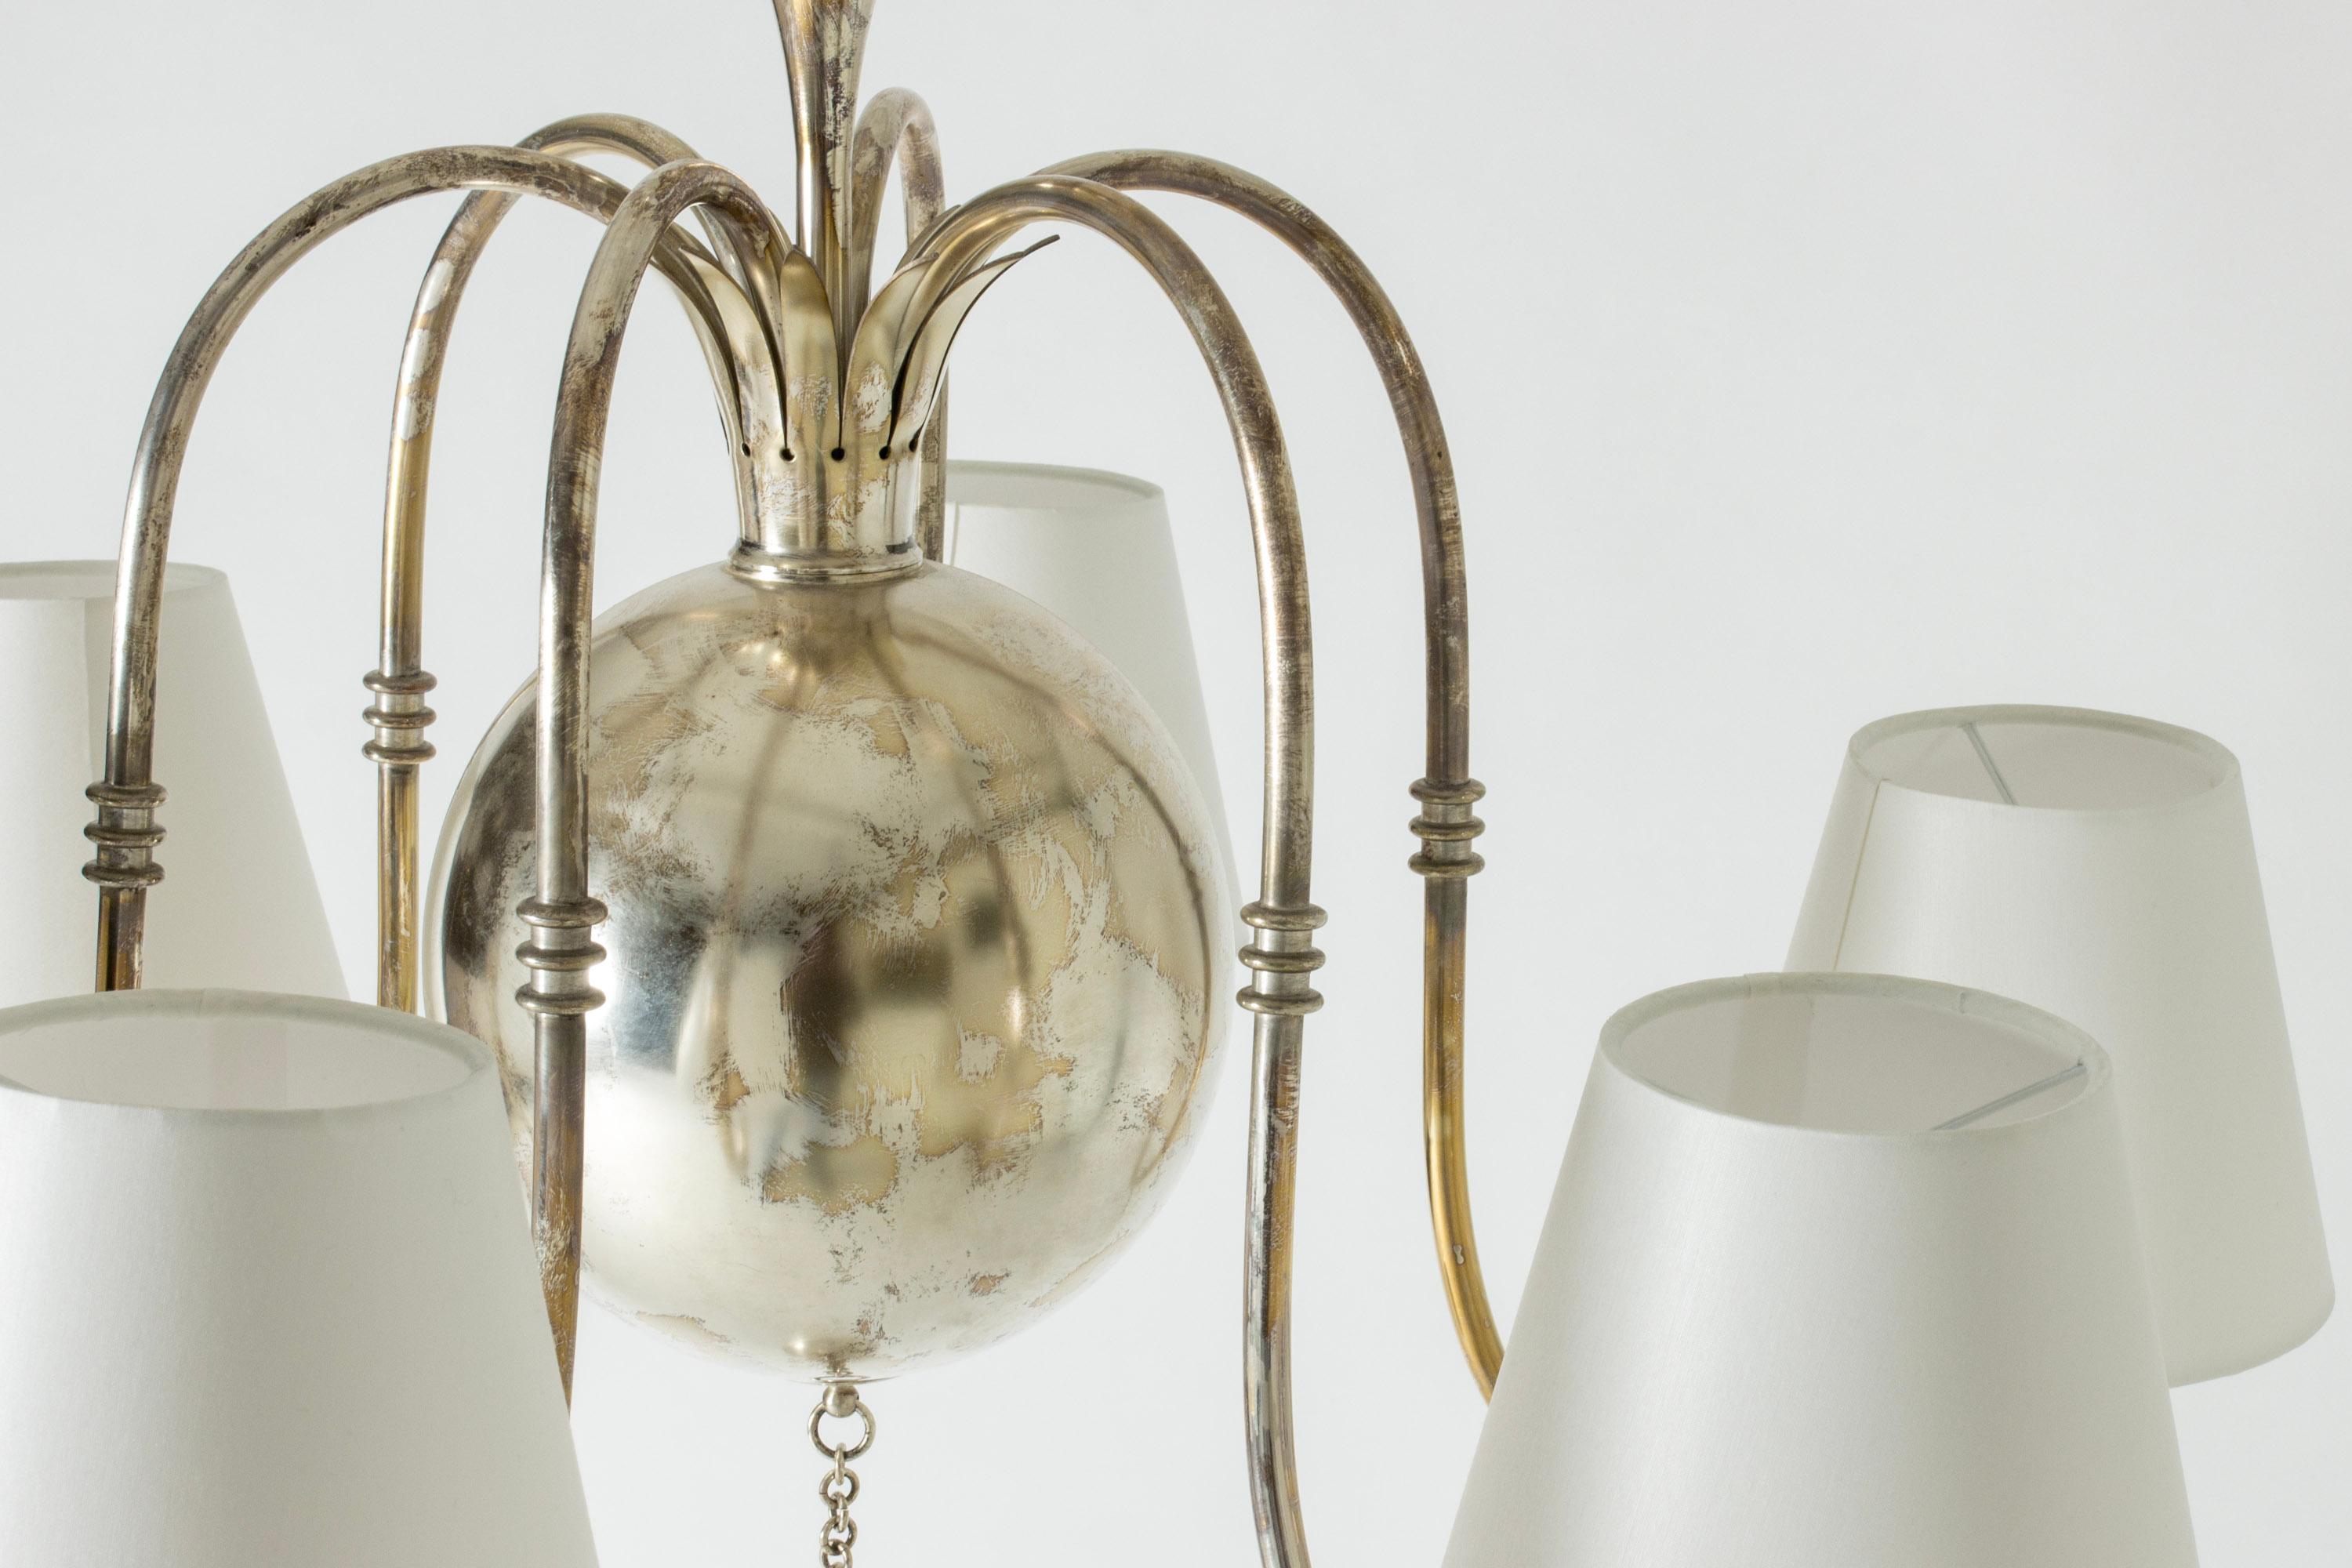 Scandinavian Modern Silver Plate Chandelier by Elis Bergh, C. G. Hallberg, 1920s In Good Condition For Sale In Stockholm, SE